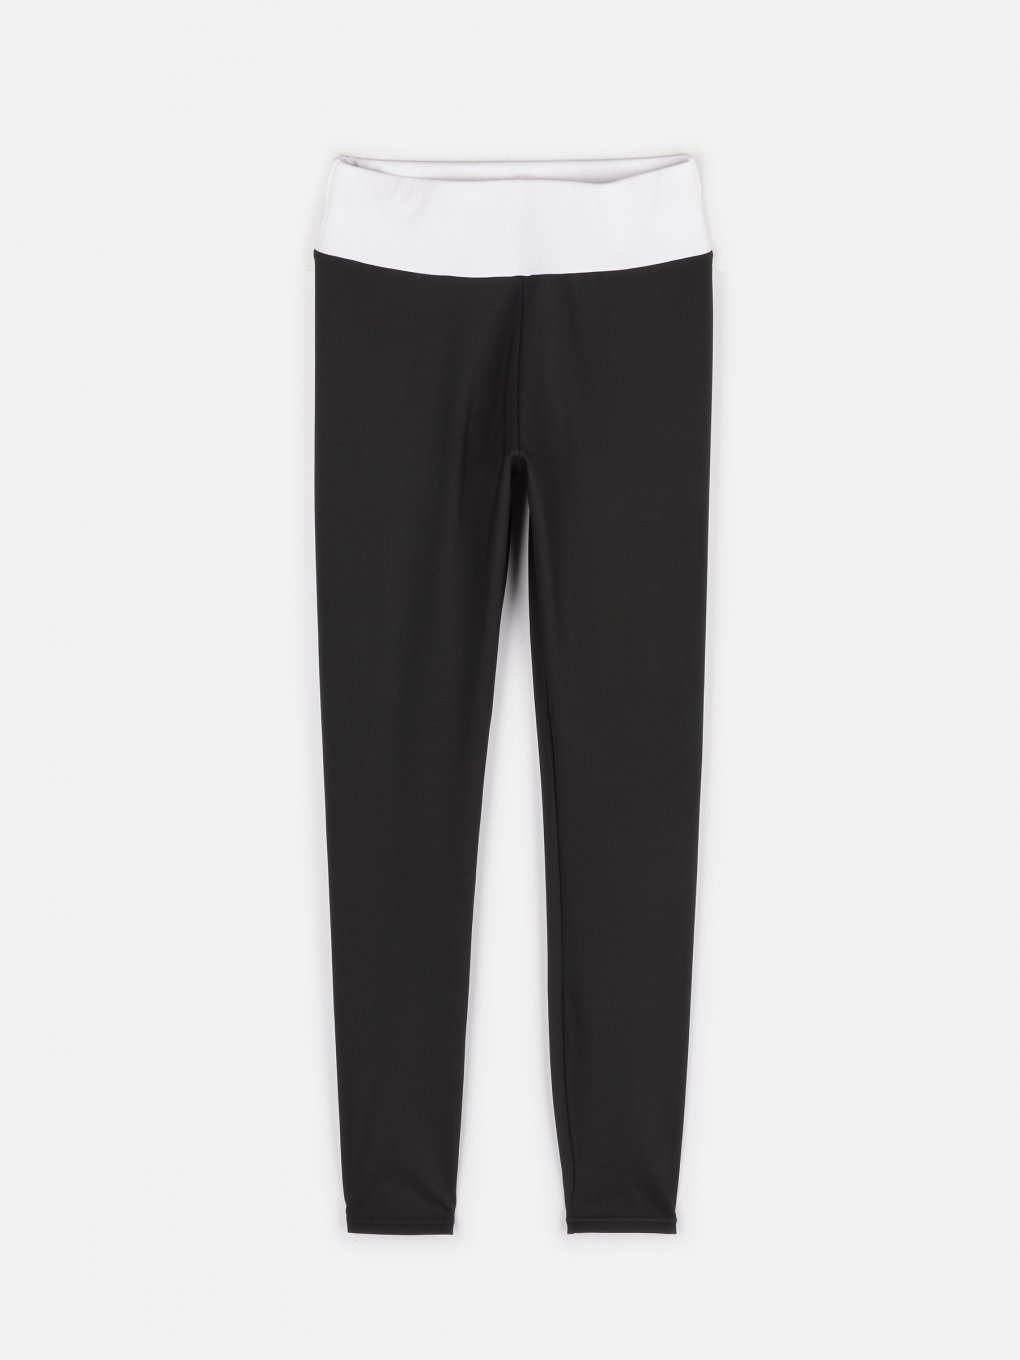 Leggings with contrast waistband